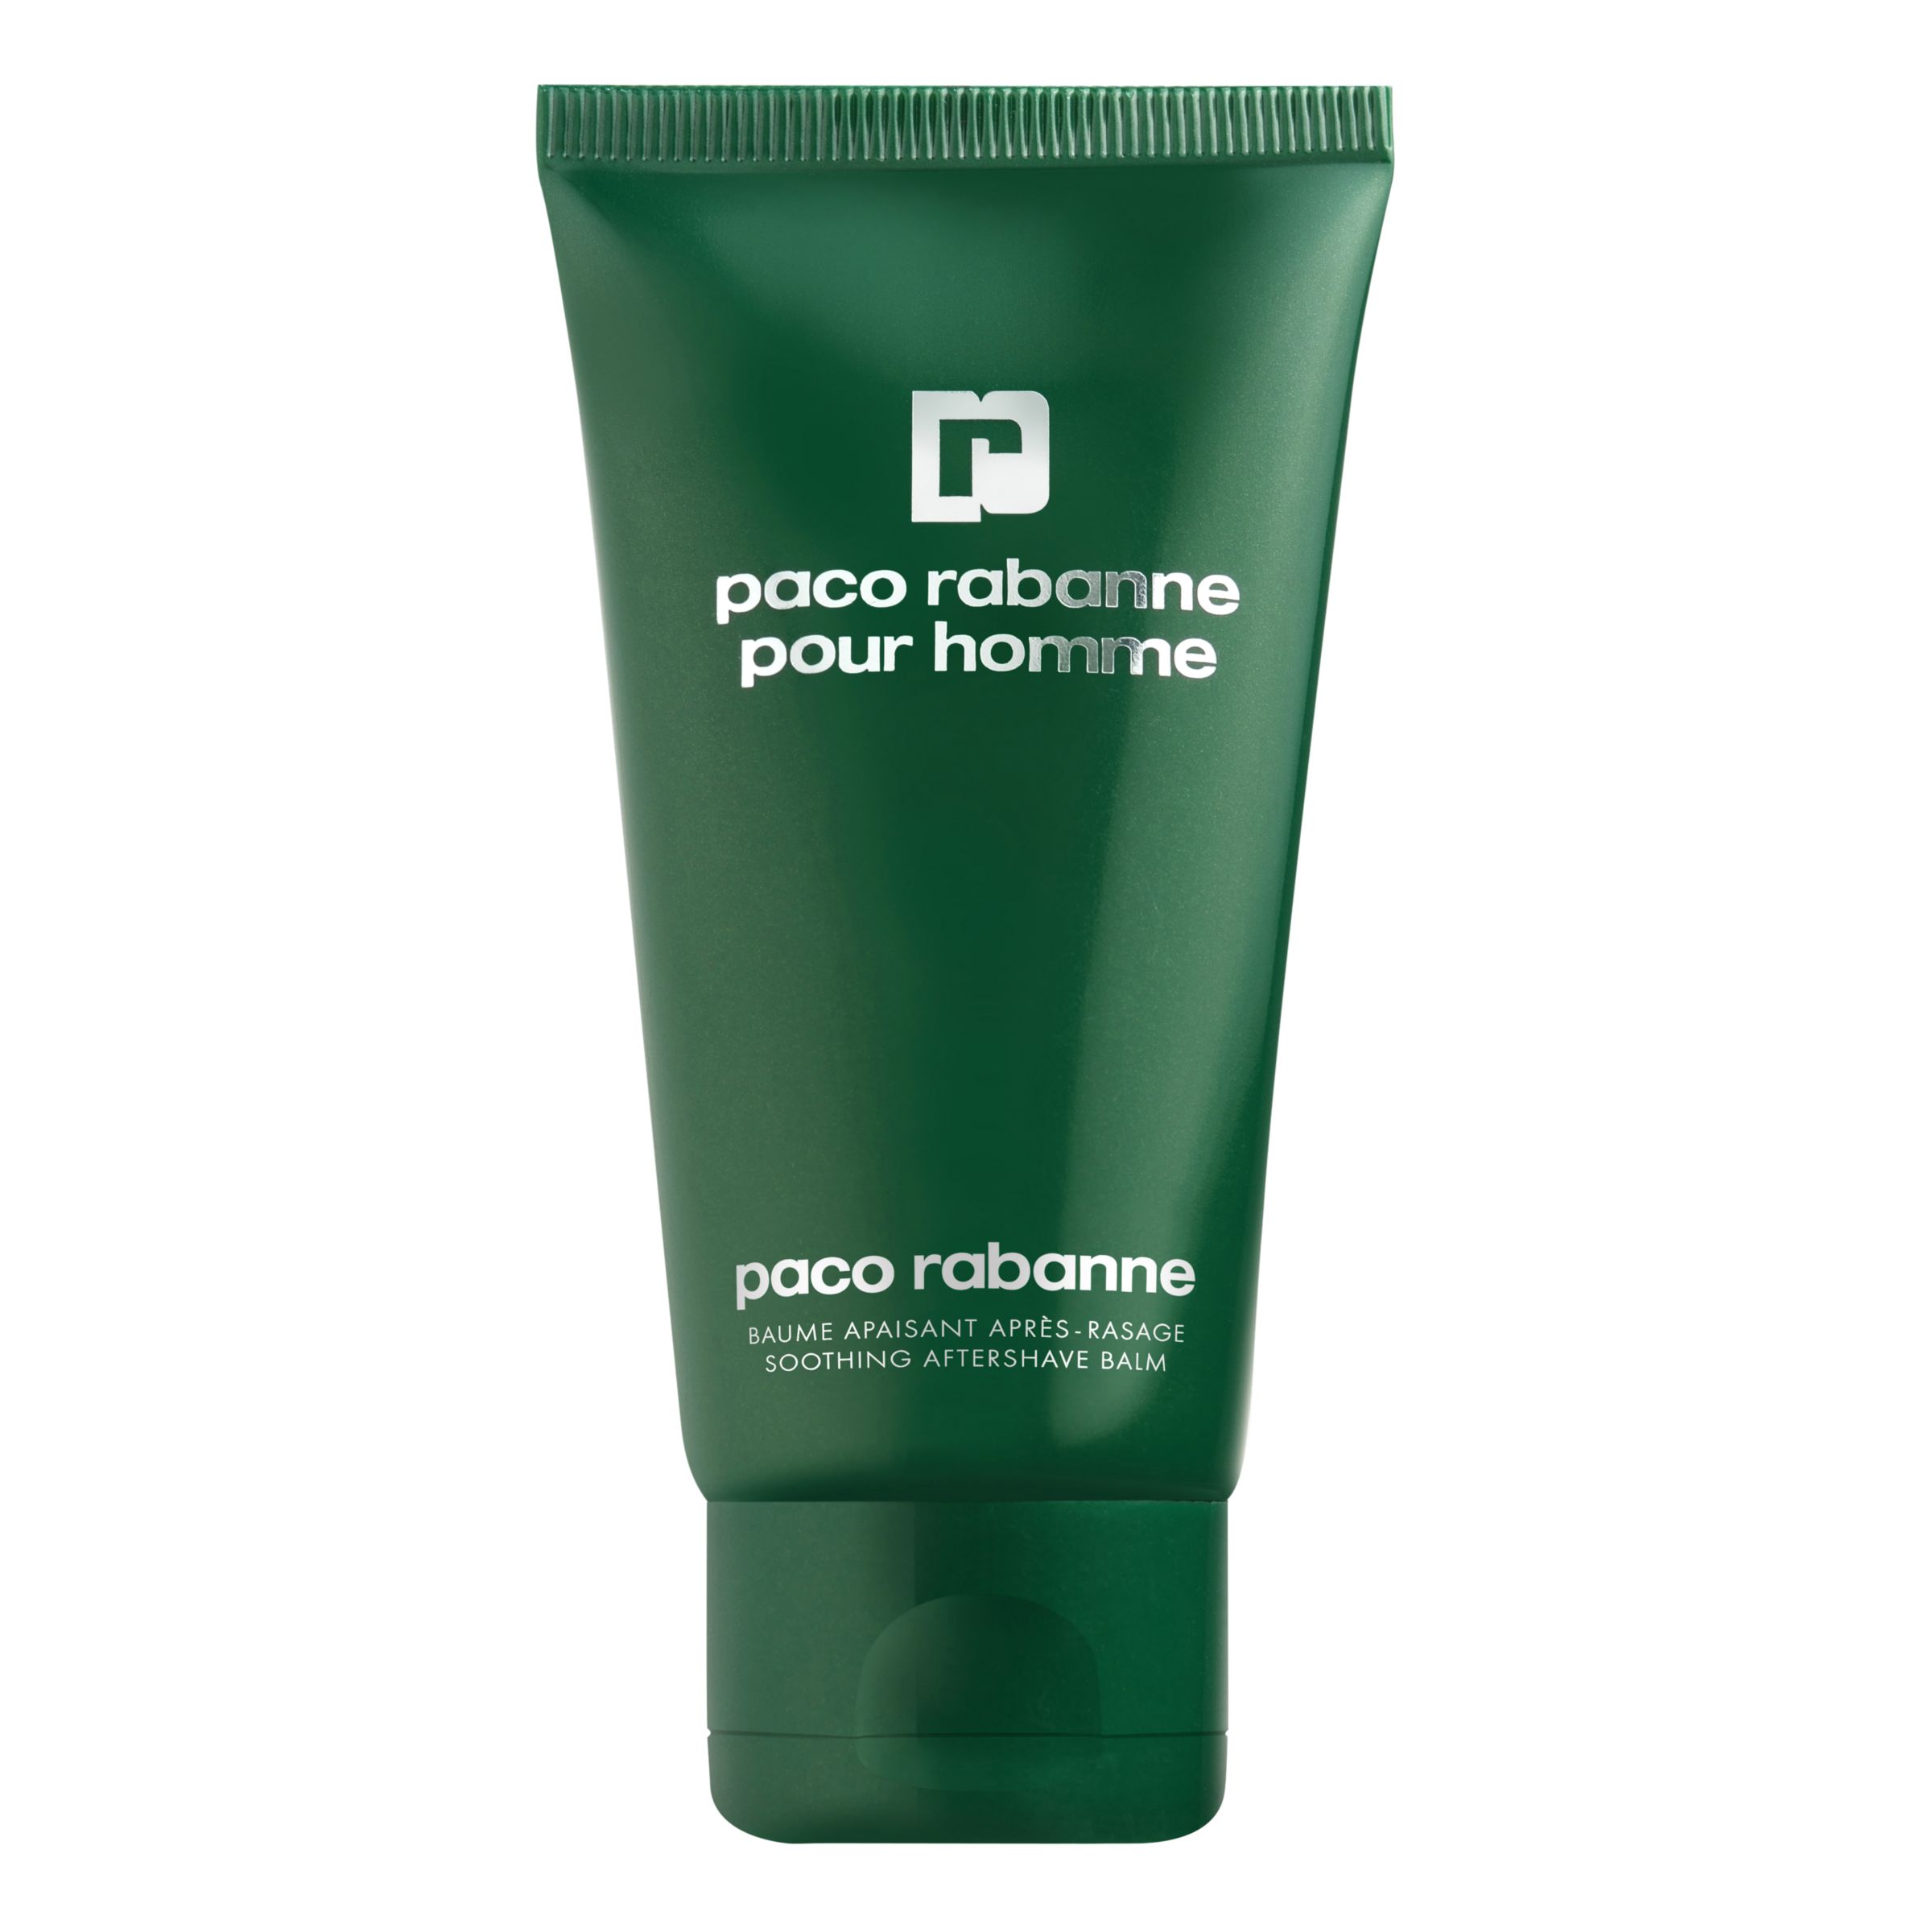 Paco Rabanne Homme Aftershave Balm, 75ml